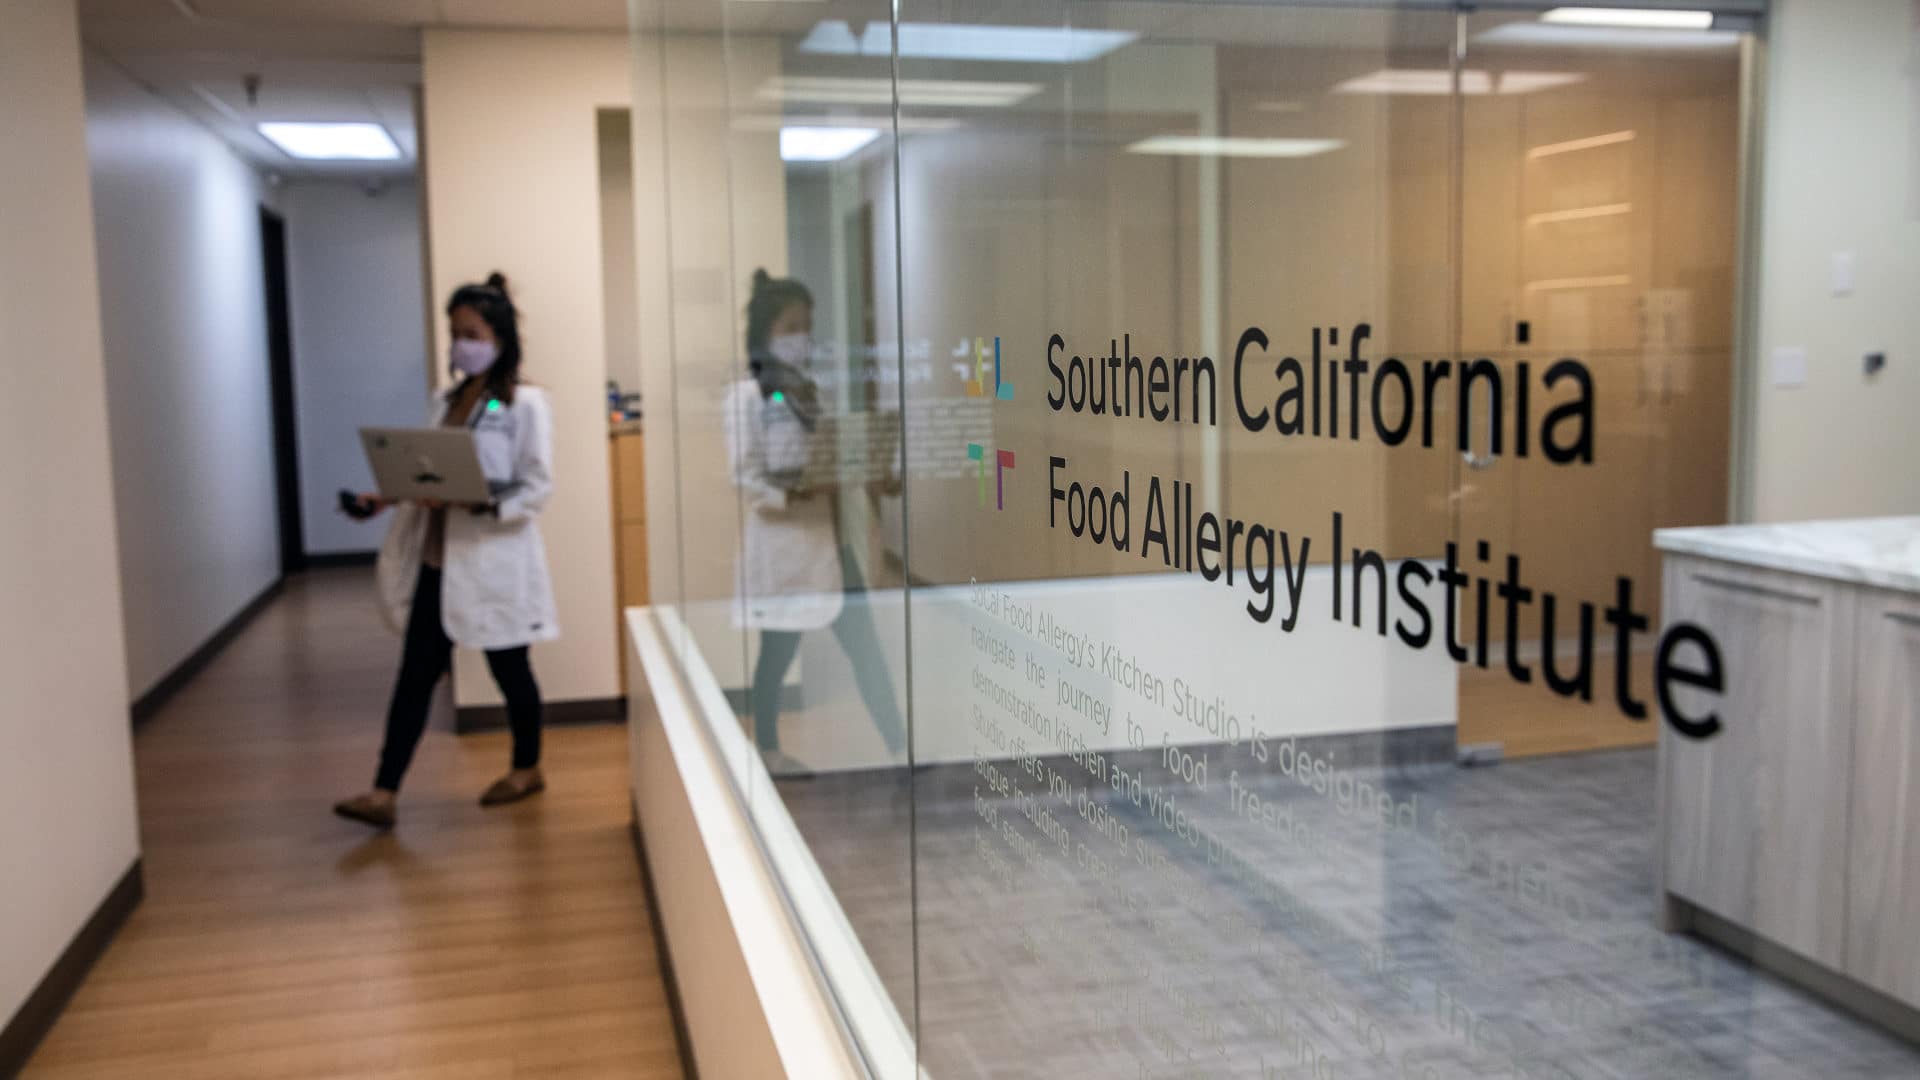 At the Southern California Food Allergy Institute, machine learning helps tailor years-long treatment plans to bring kids into food-allergy remission — essentially eliminating the allergy. But to many experts, their methods are murky.